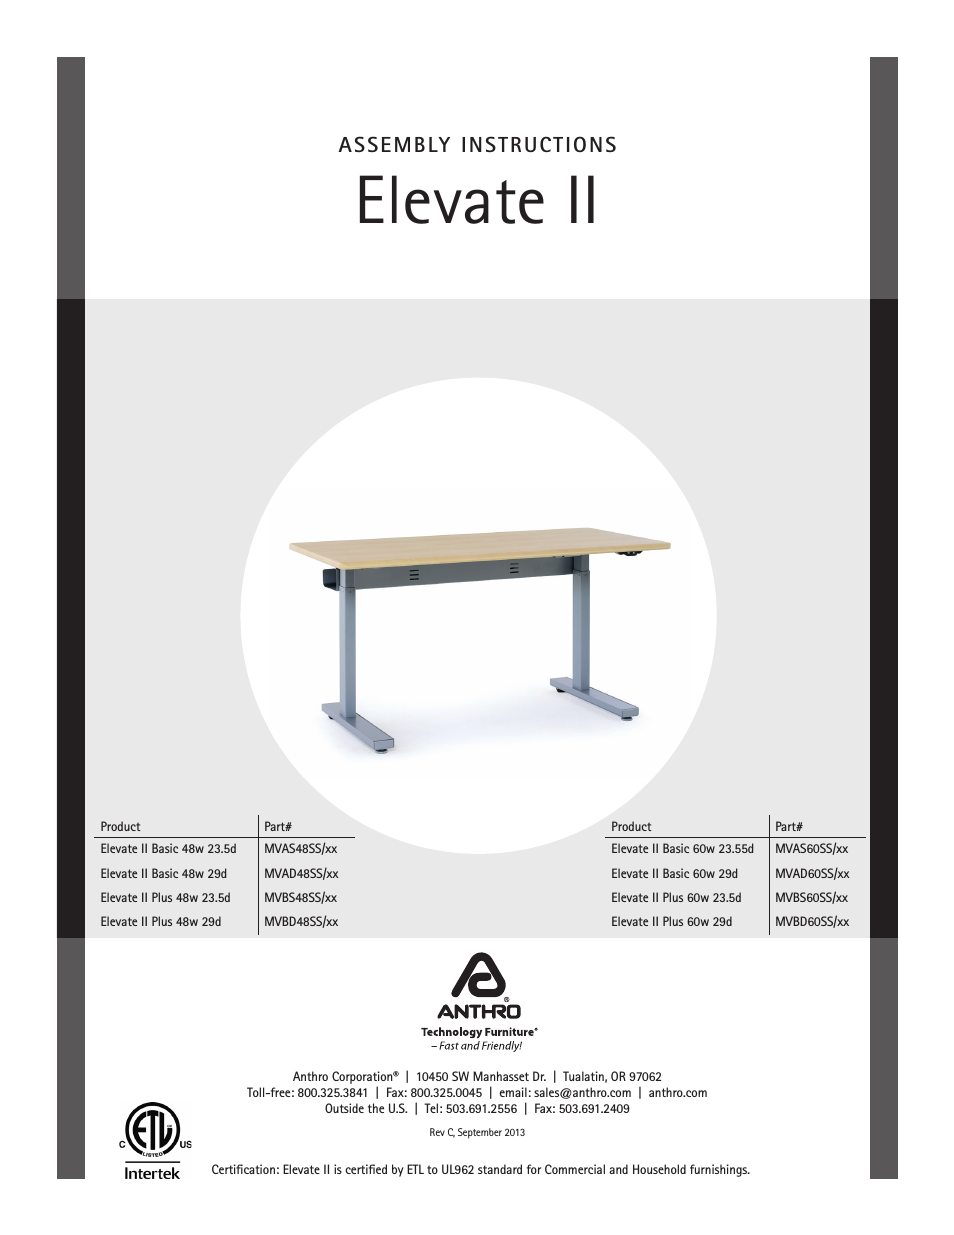 Elevate II Single Surface Assembly Instructions